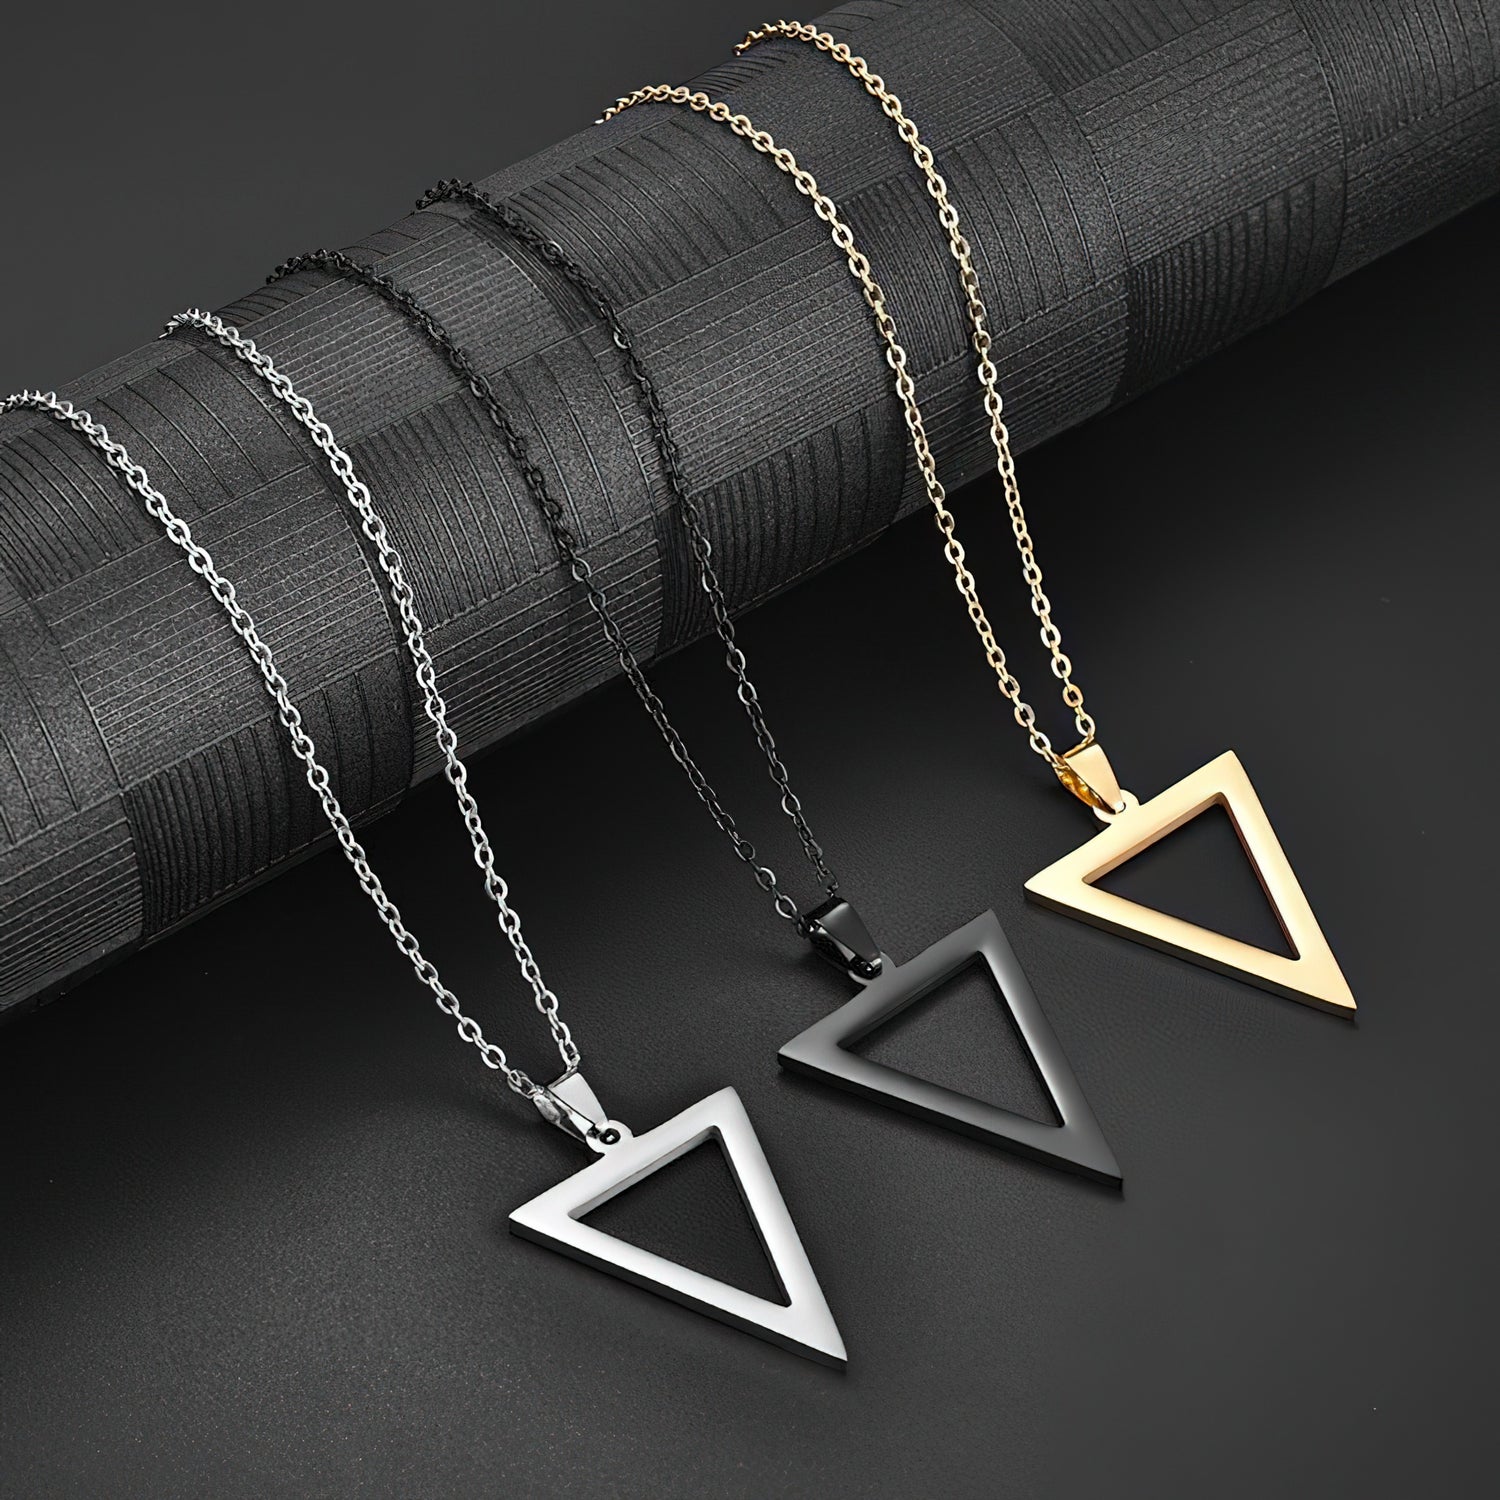 Buy Triangle Necklace for Men, Groomsmen Gift, Men's Necklace With a Silver Triangle  Pendant, Silver Chain, Gift for Him, Geometric Necklace Online in India -  Etsy